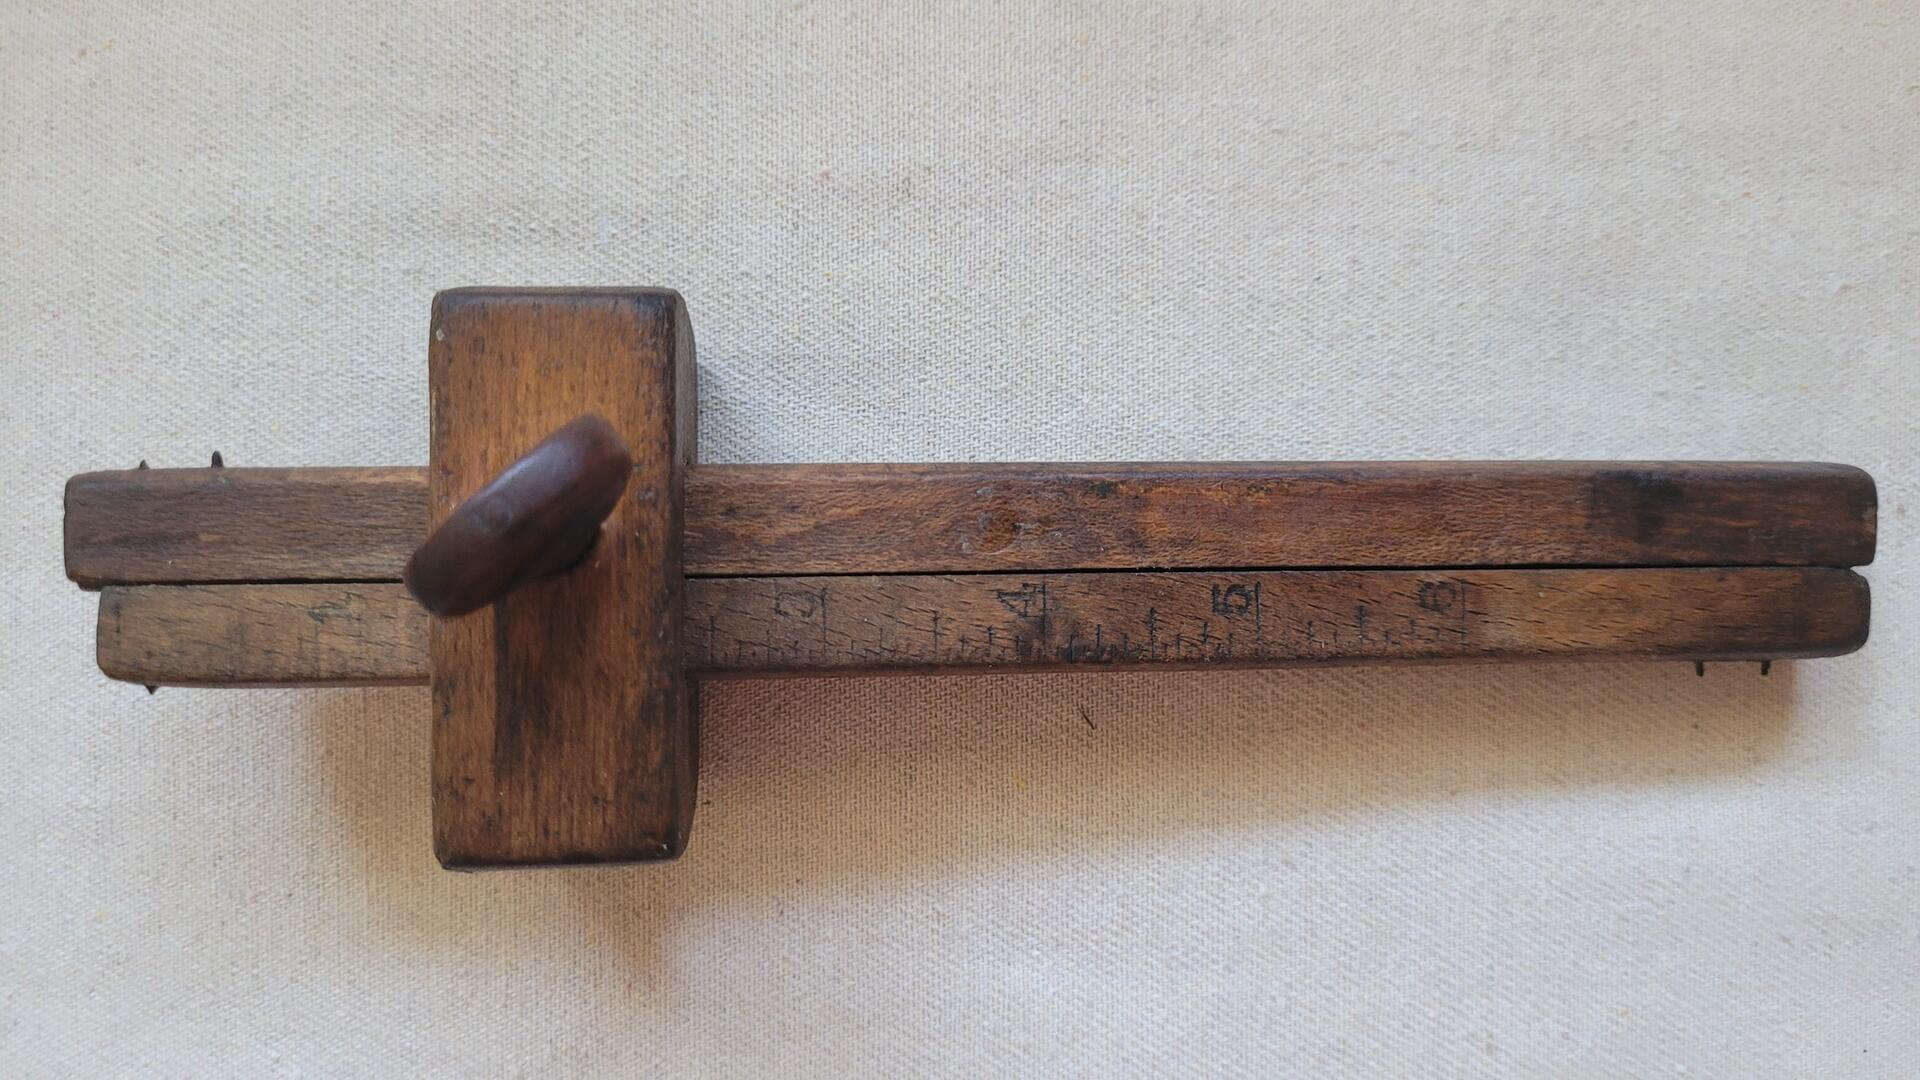 antique-wooden-multi-arm thumb-locking-screw-mortise-marking-gauge-vintage-woodworking-and-cabinet-making-marking-and-measuring-collectible-hand-tools